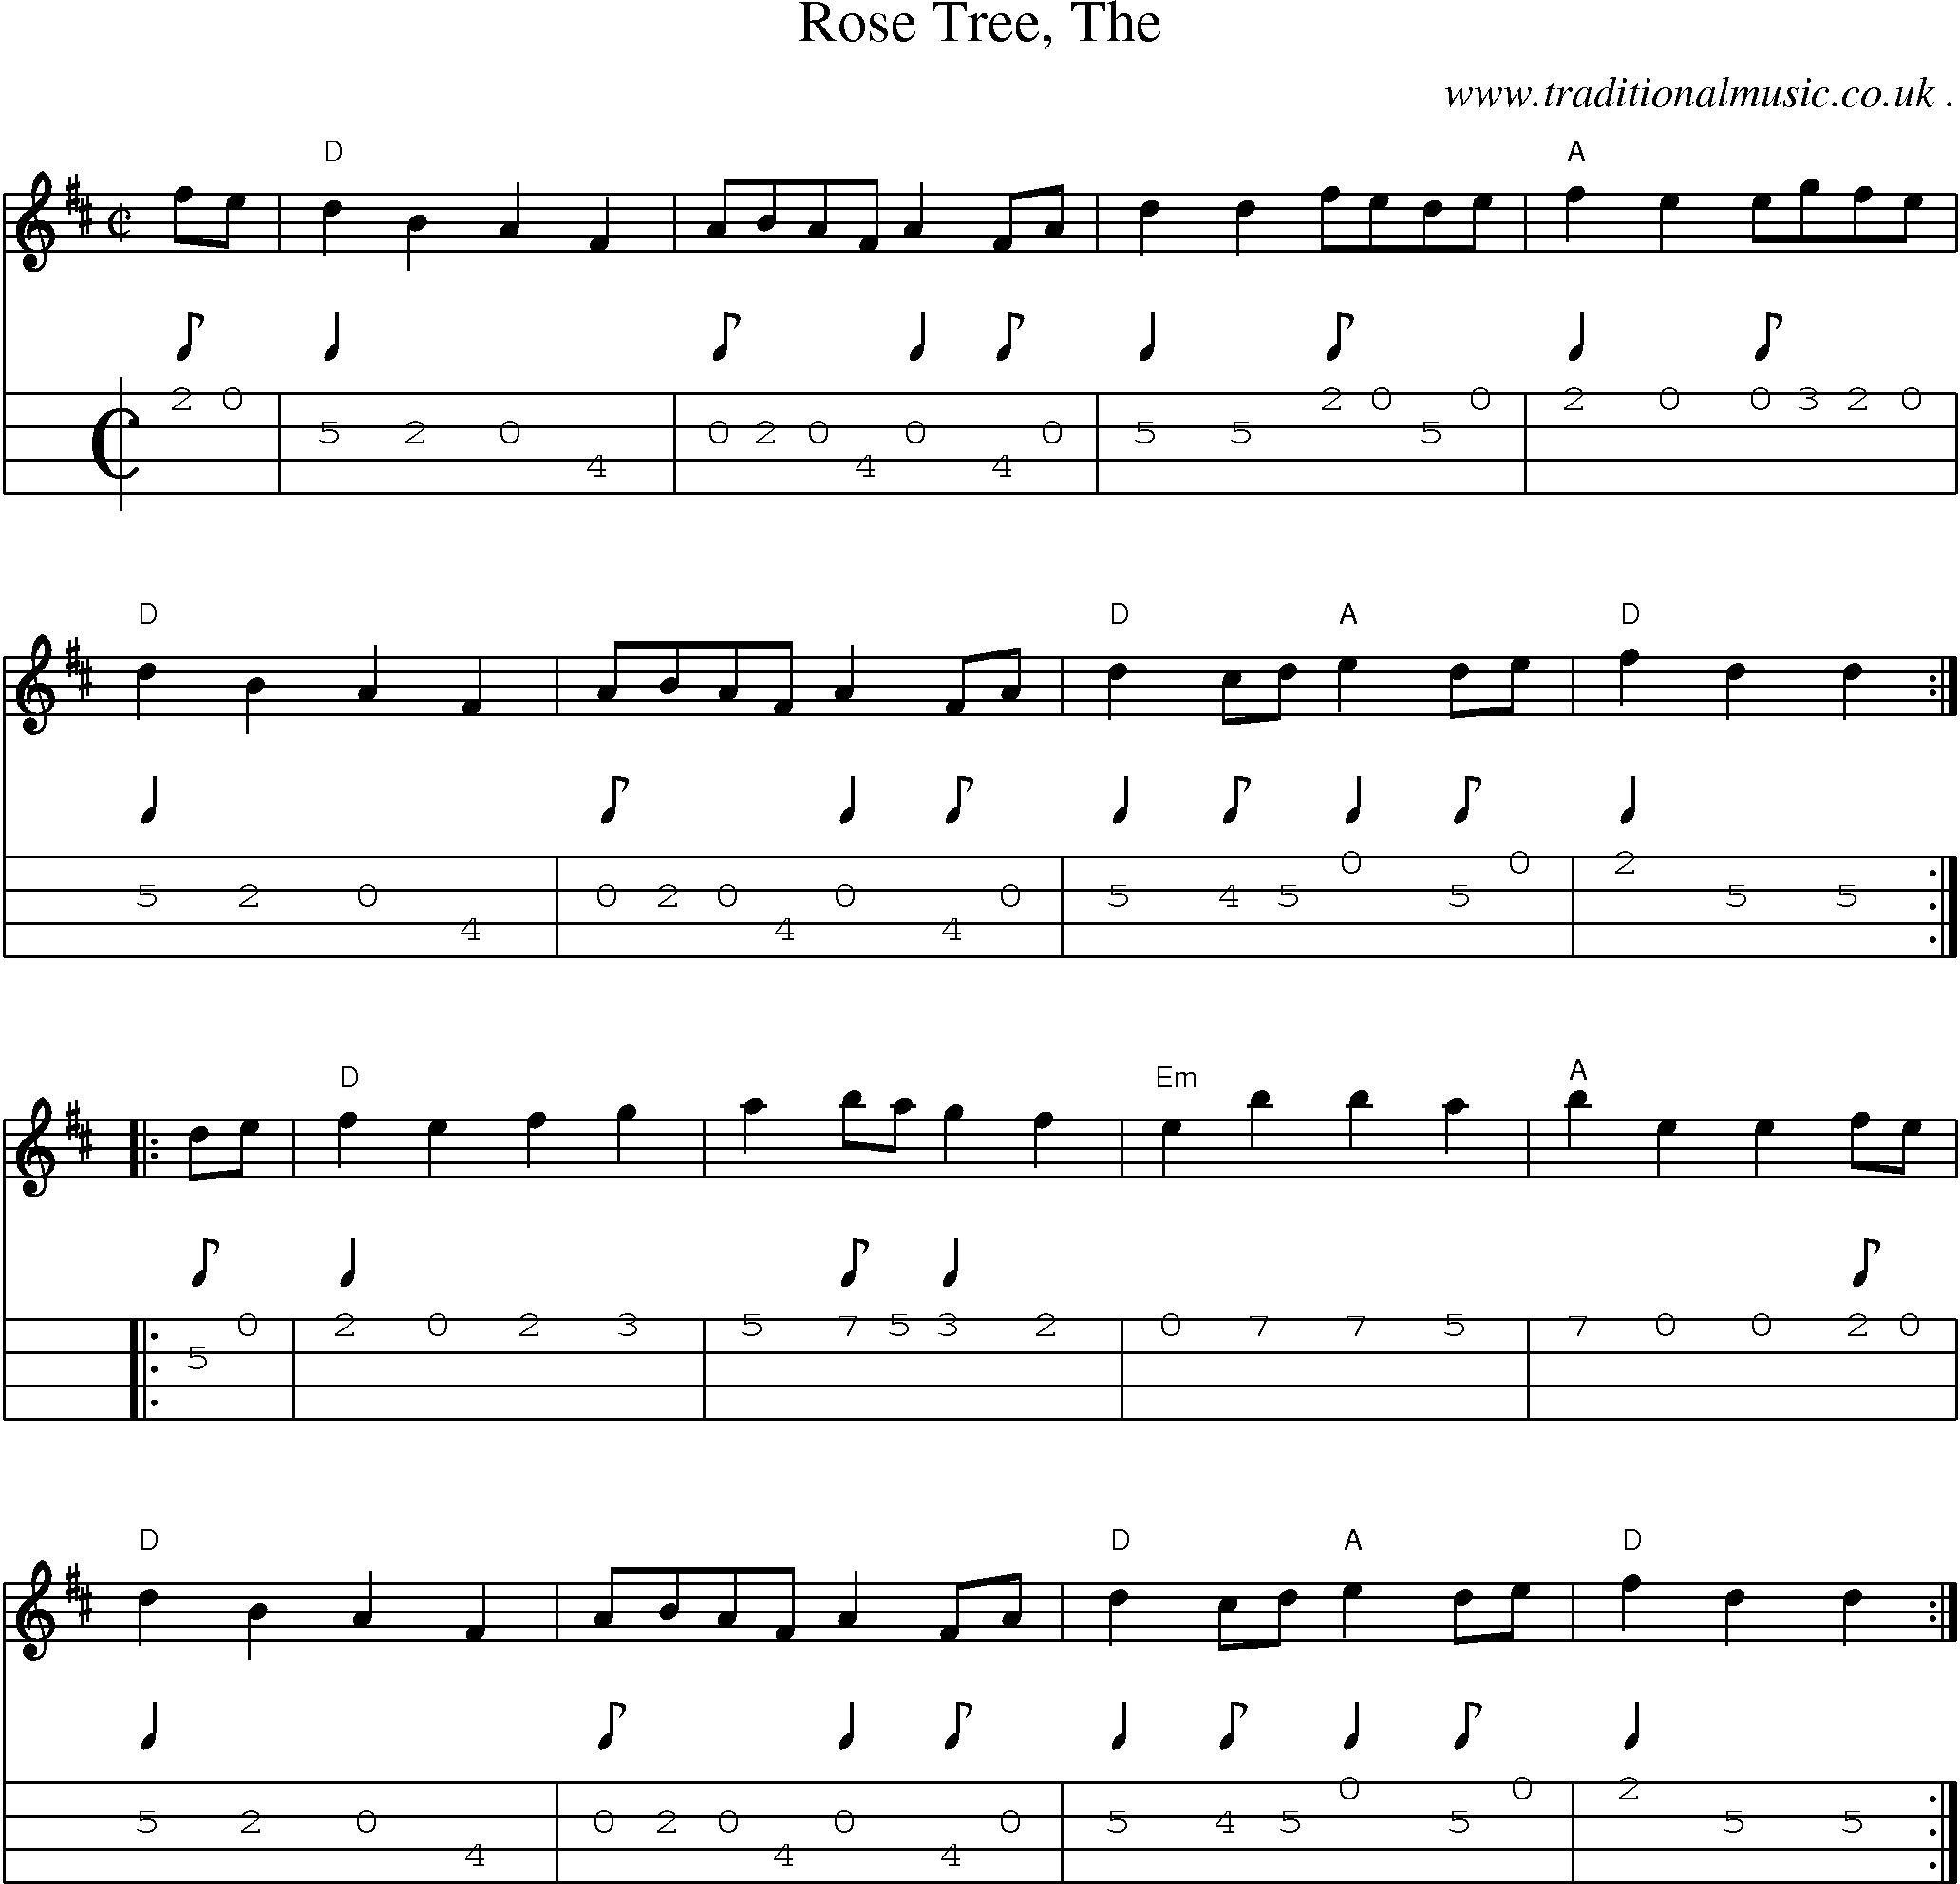 Music Score and Guitar Tabs for Rose Tree The